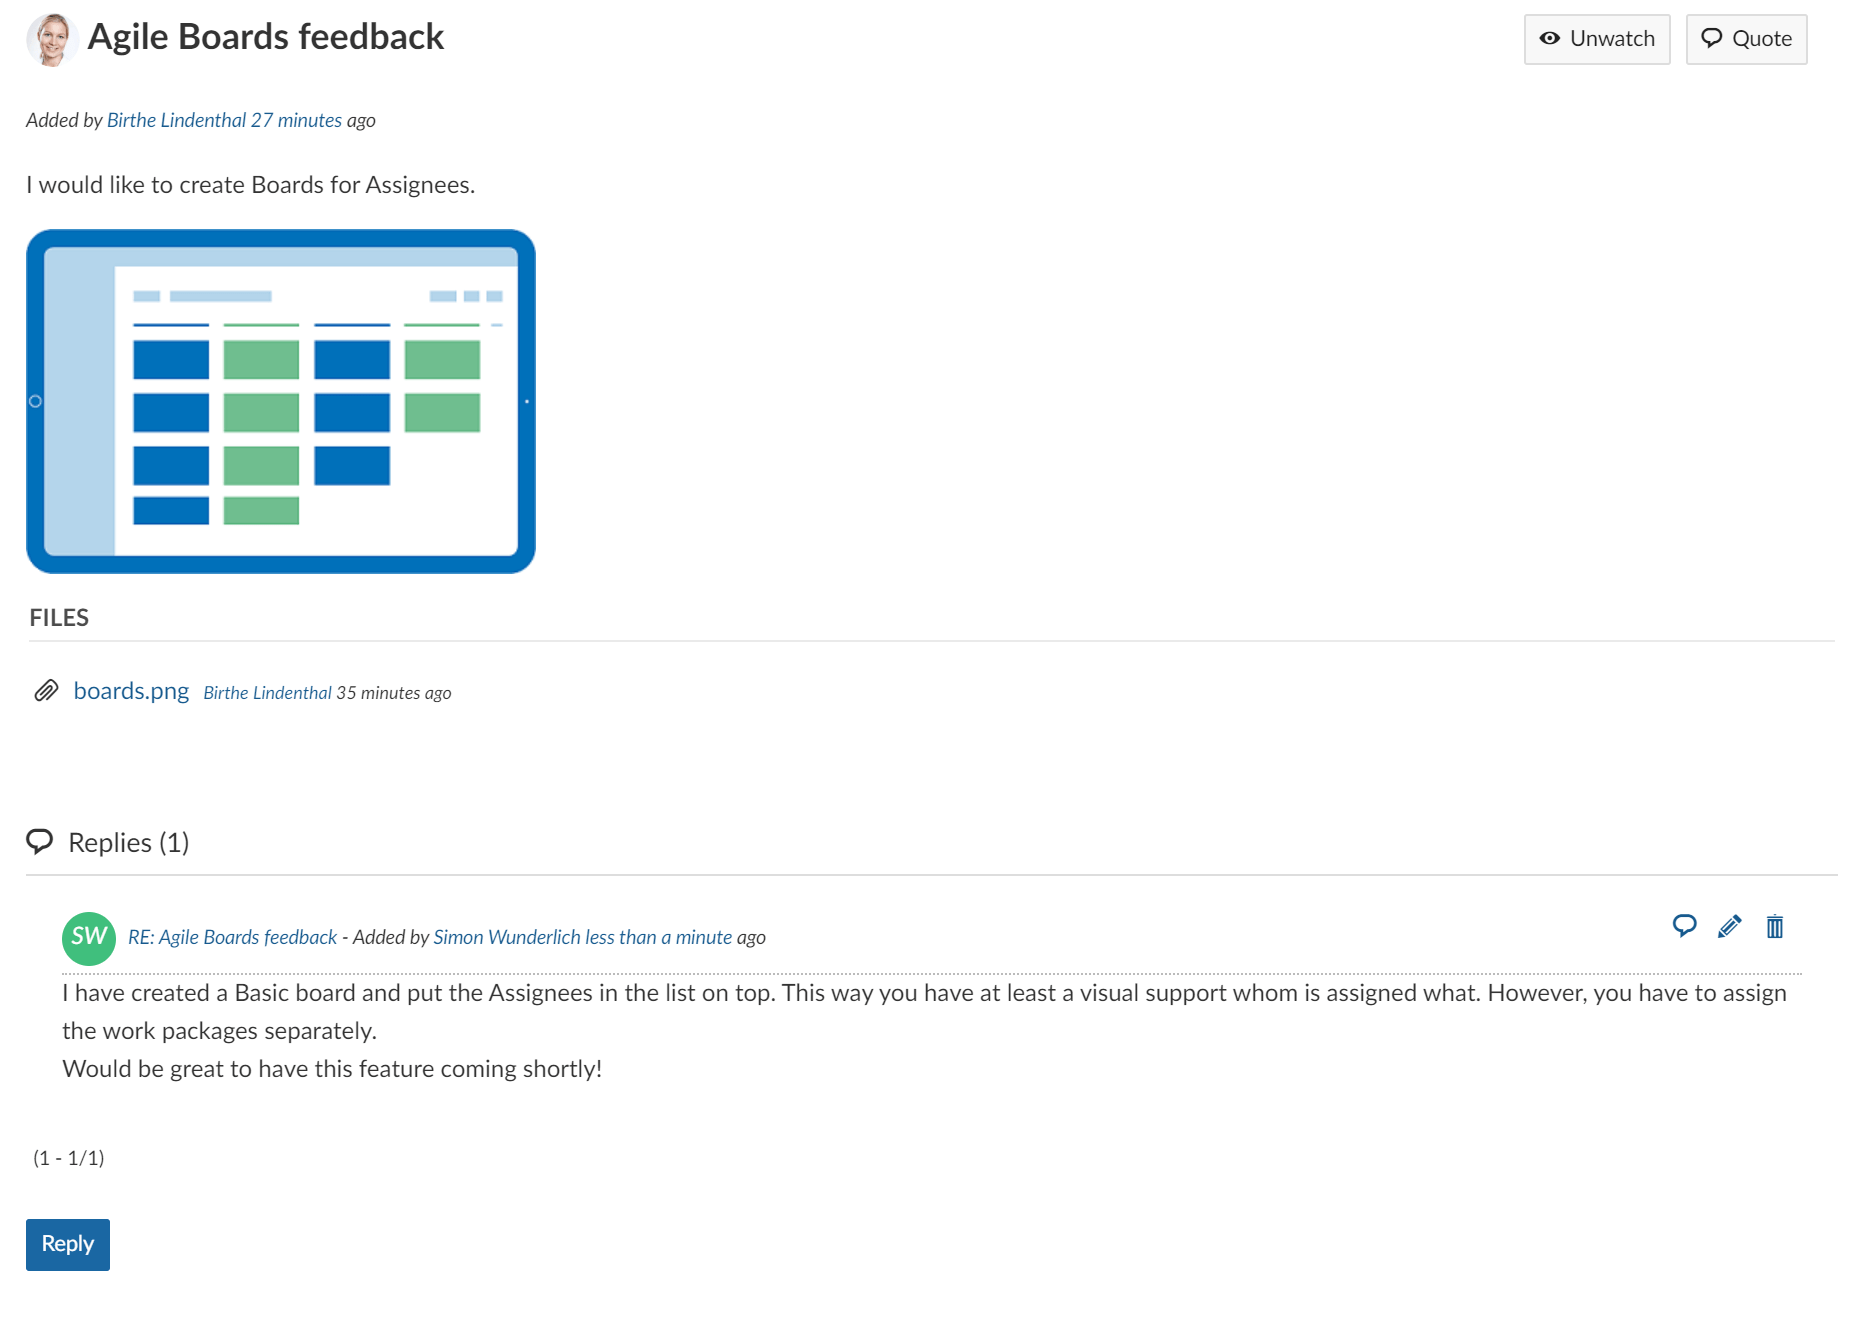 reply to existing forum message